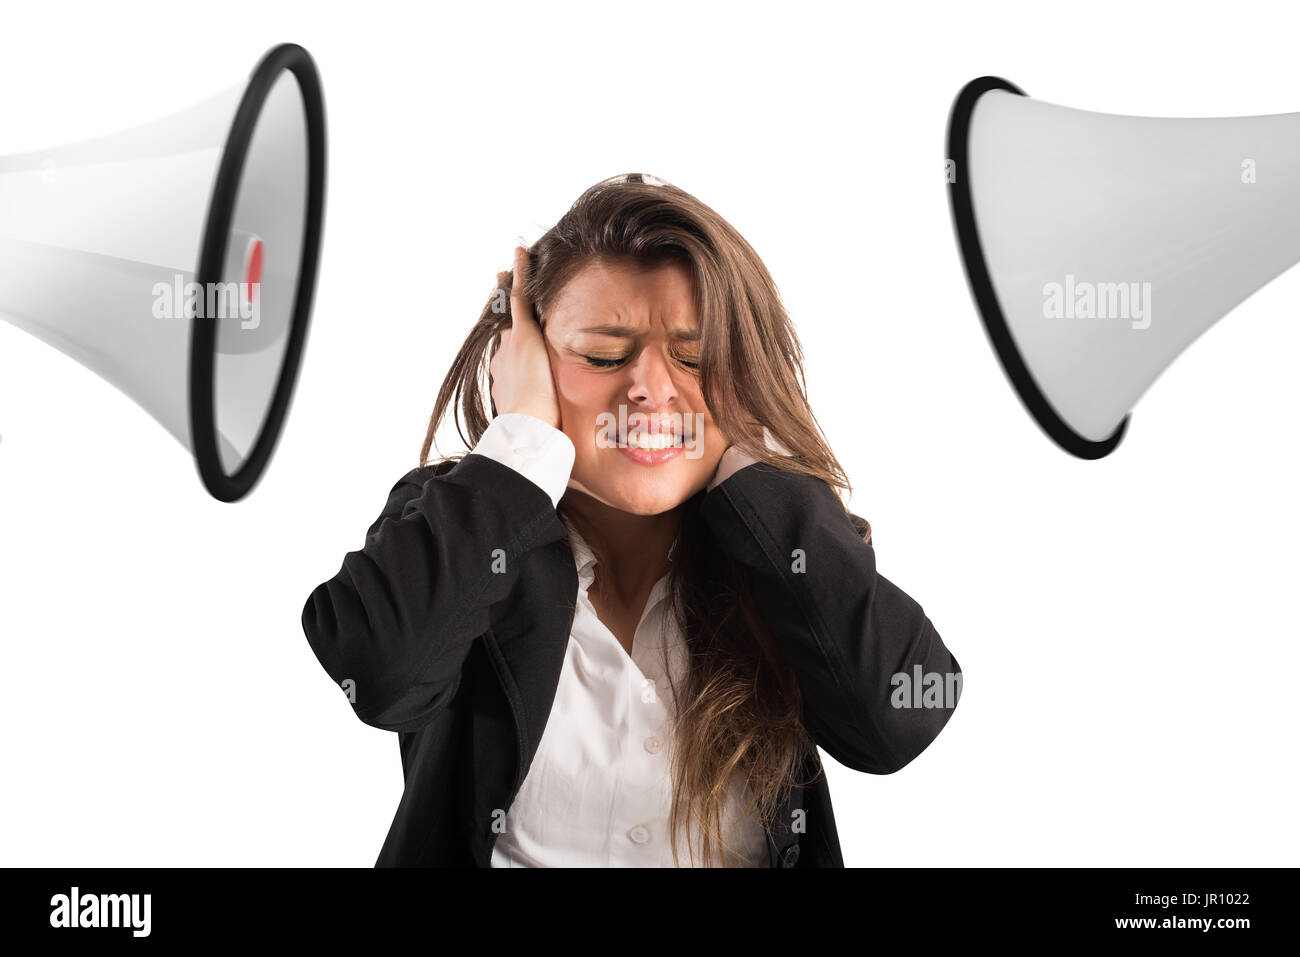 Stress concept with screaming colleagues Stock Photo